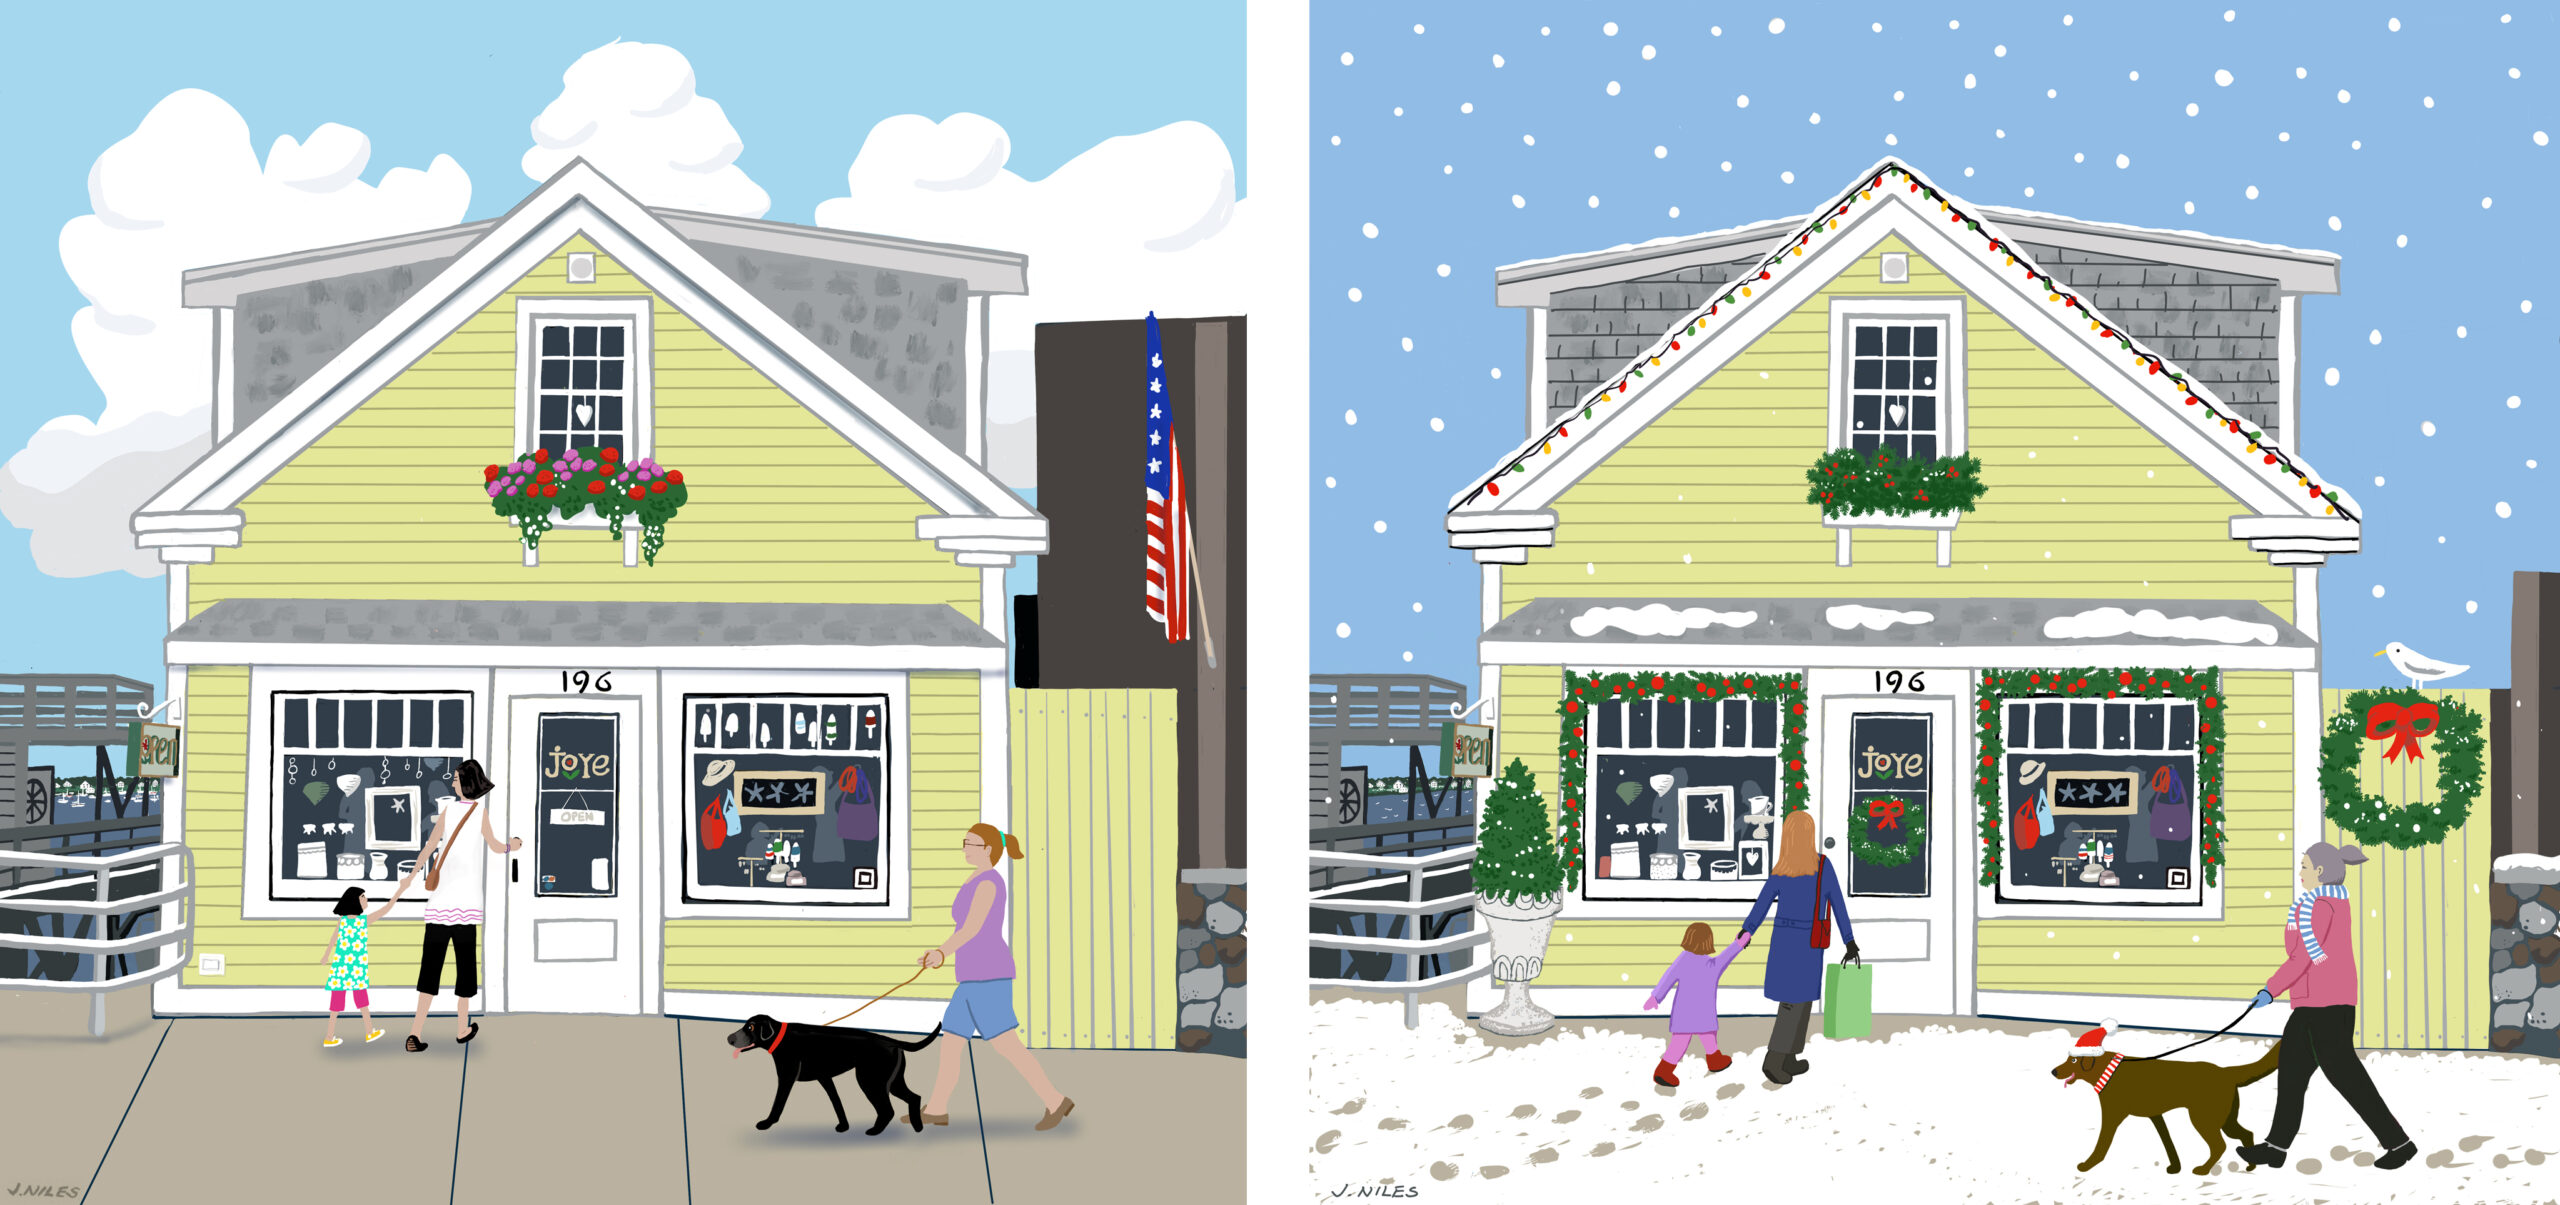 Illustrations done for Joye gift shop Scituate, MA